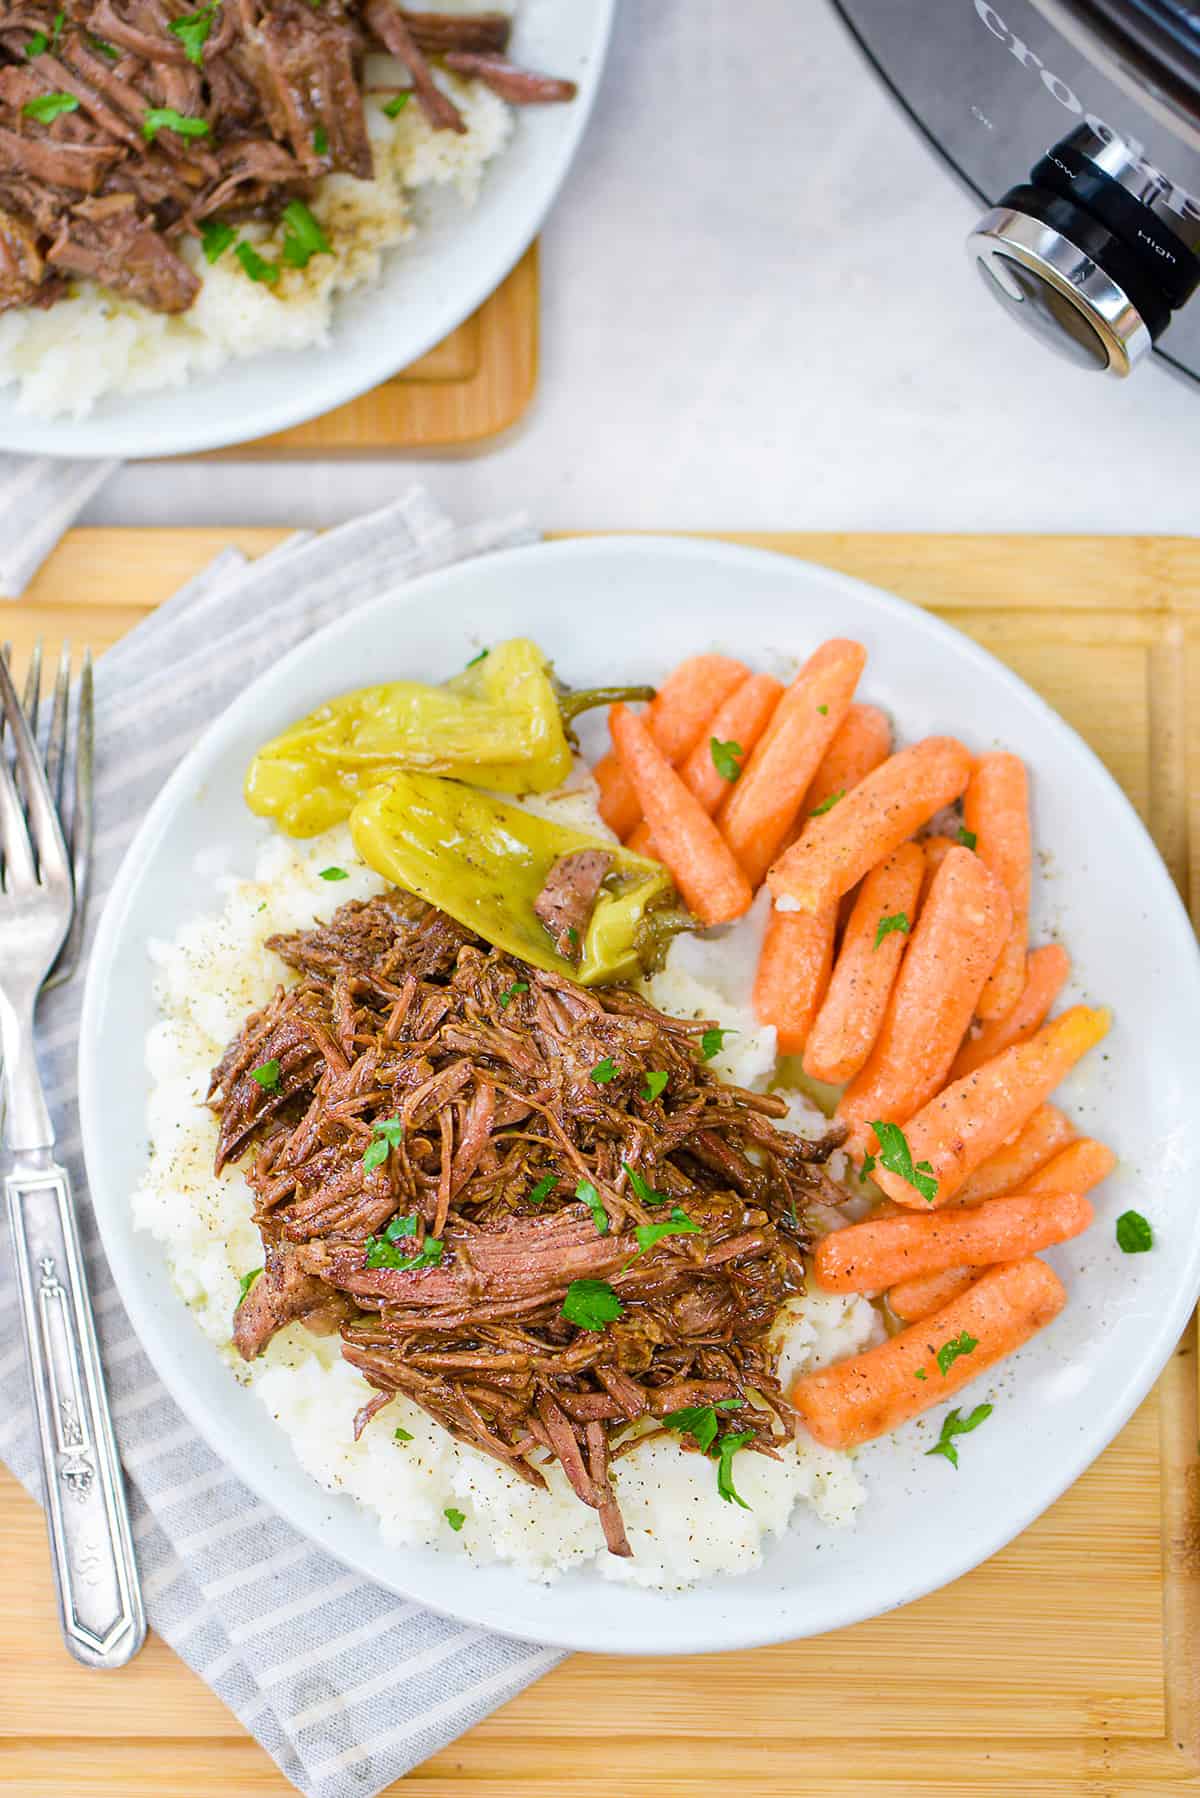 Mississippi Pot Roast on plate with mashed potatoes and carrots.